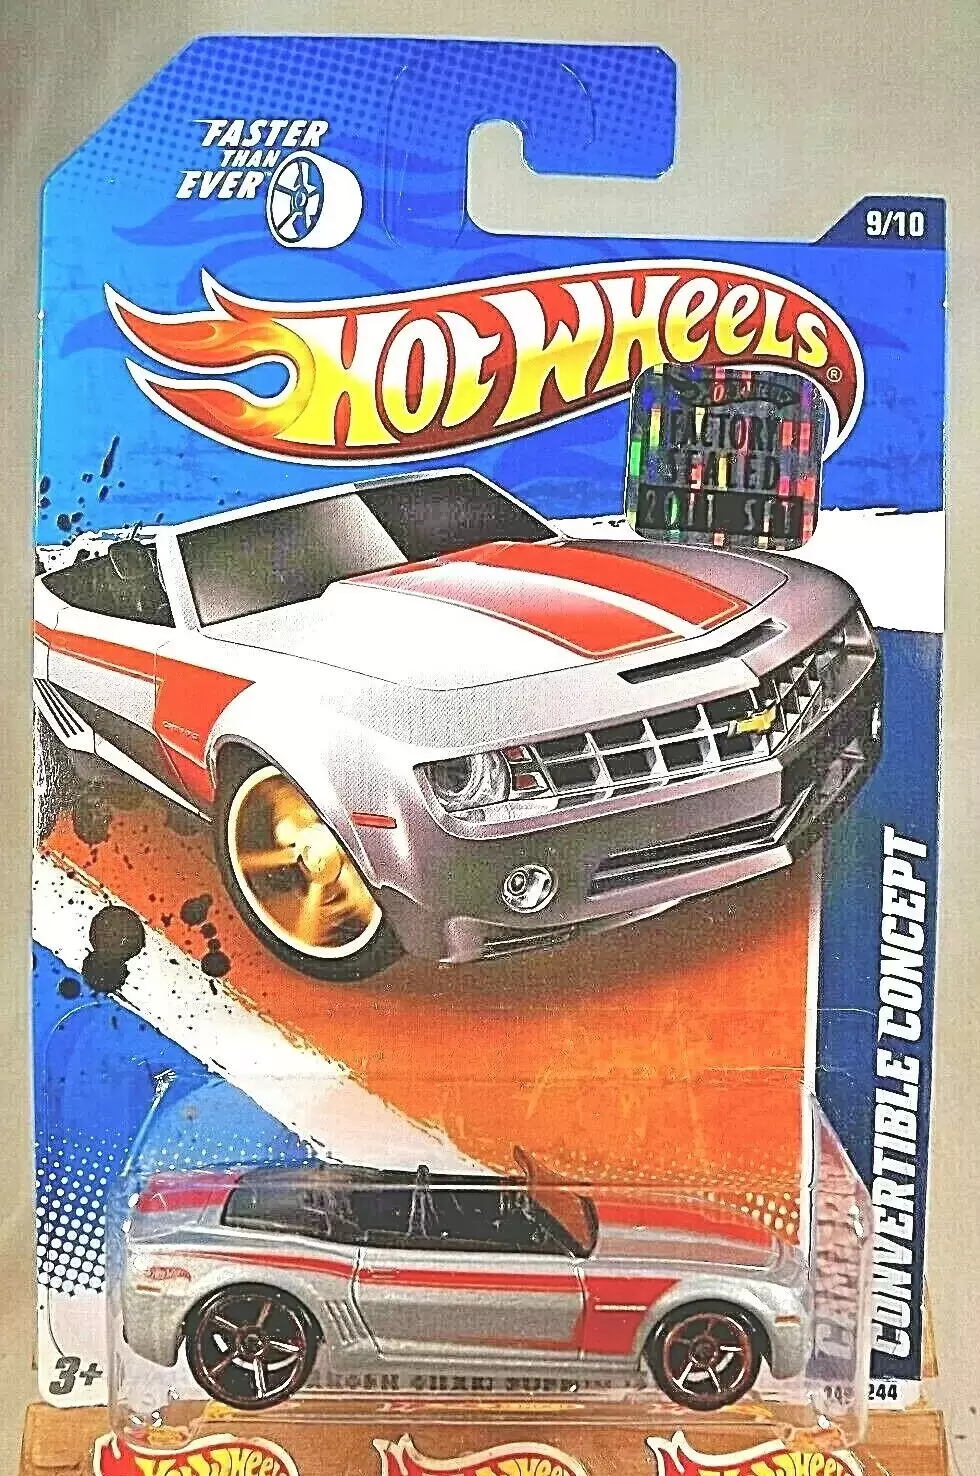 Hot Wheels Classiques - Camaro Convertible Concept - Faster Than Ever 11